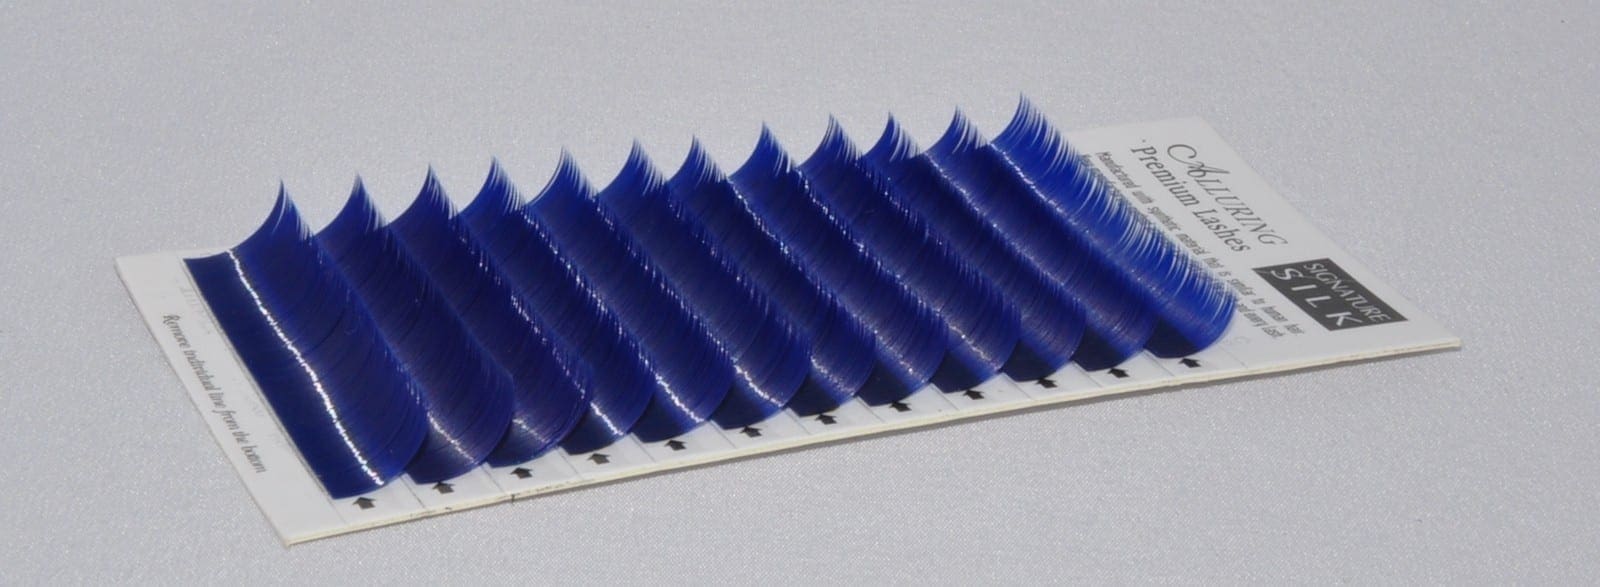 A close up of blue colored individual lashes